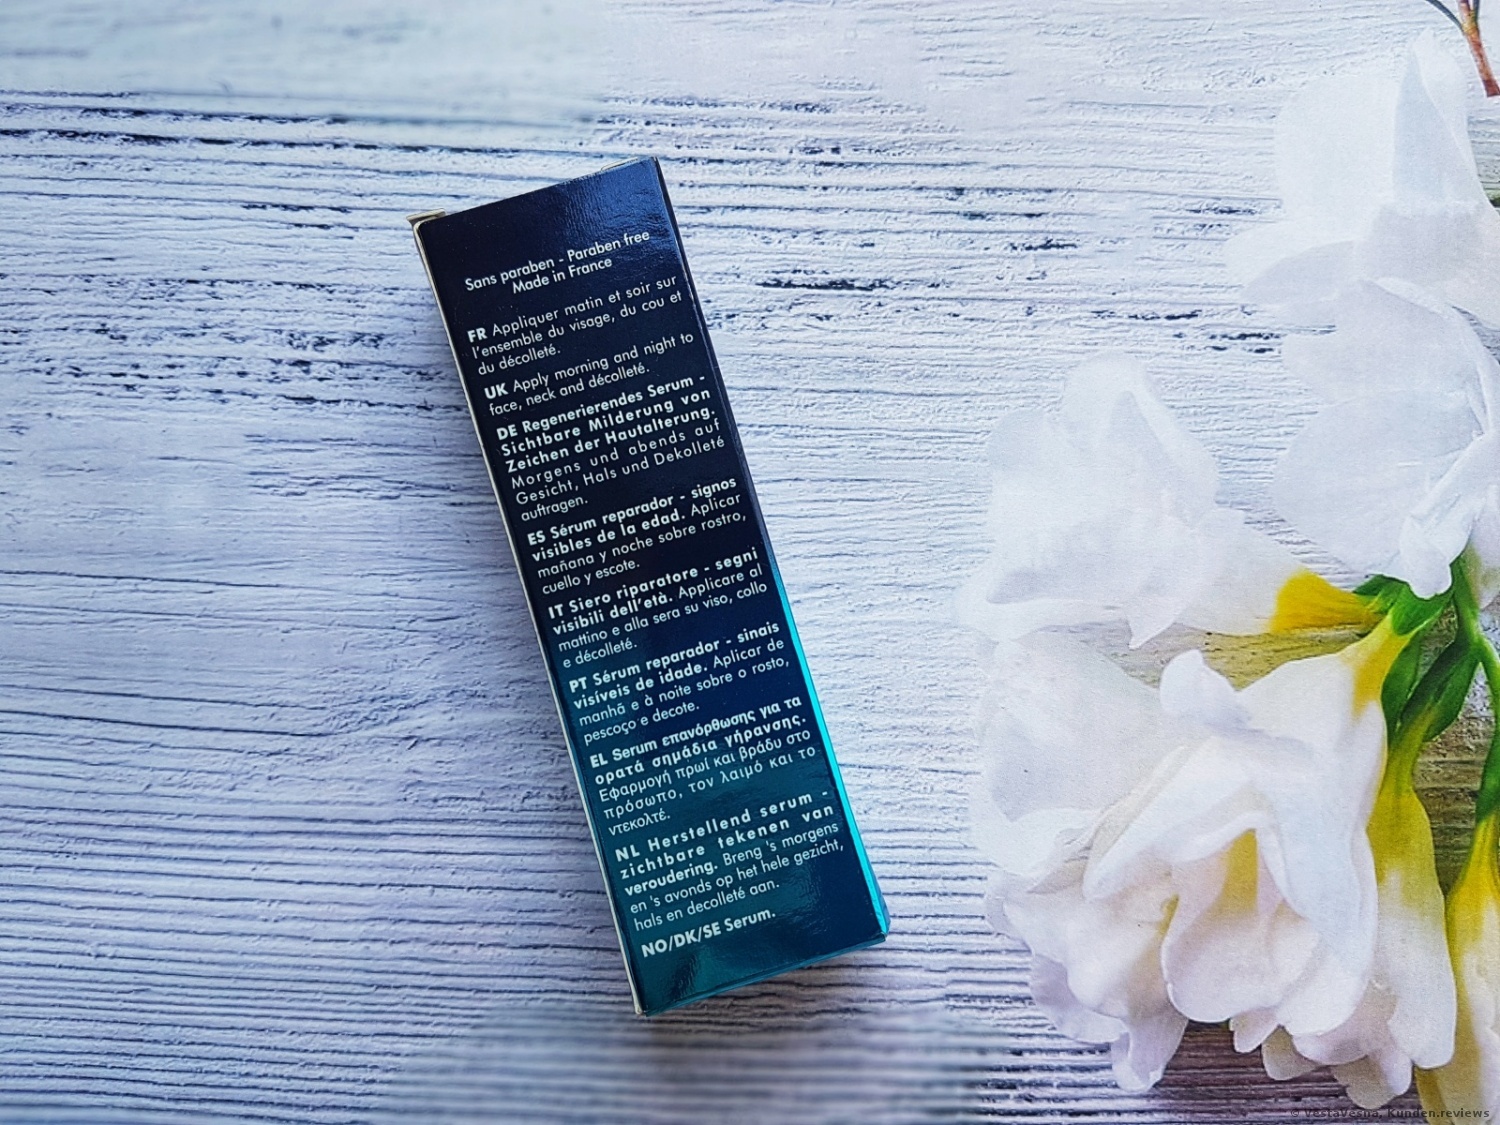 BLUE THERAPY ACCELERATED SERUM Biotherm